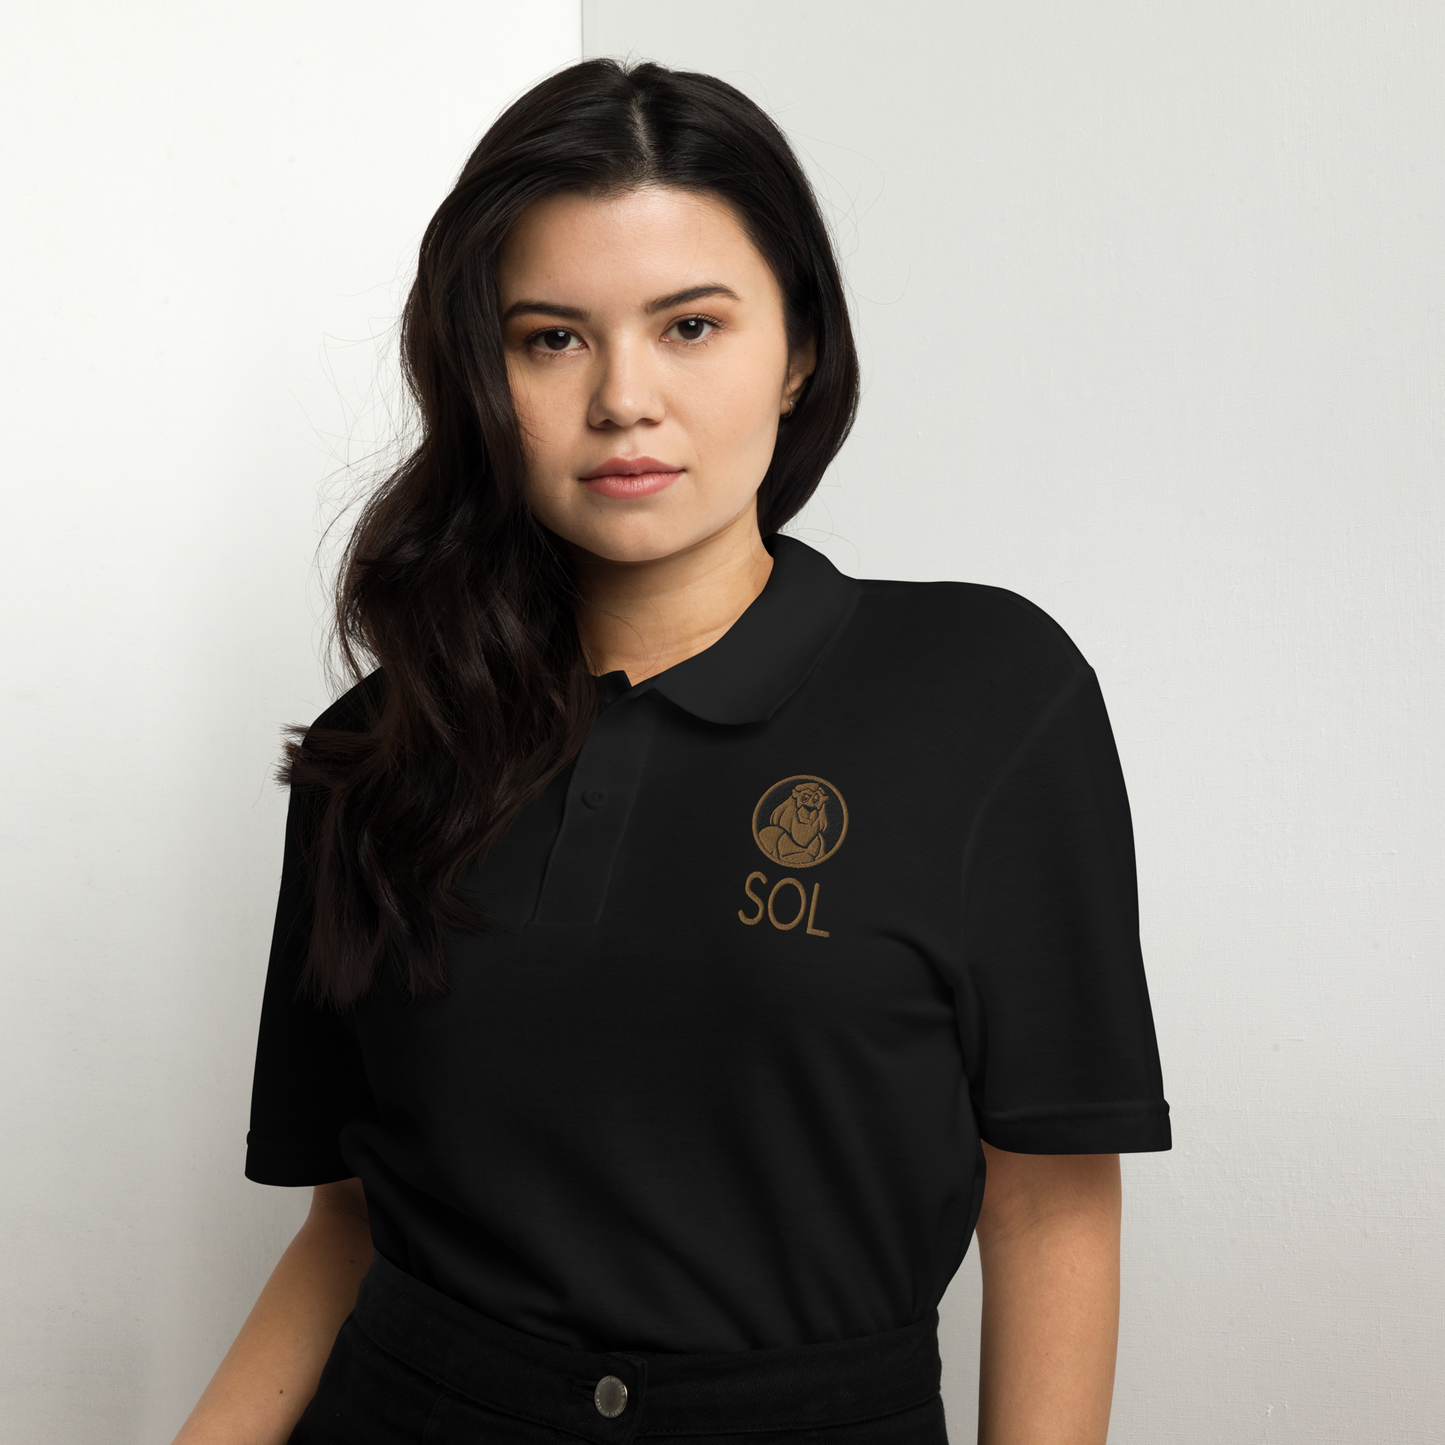 Unisex Adult SOL Polo